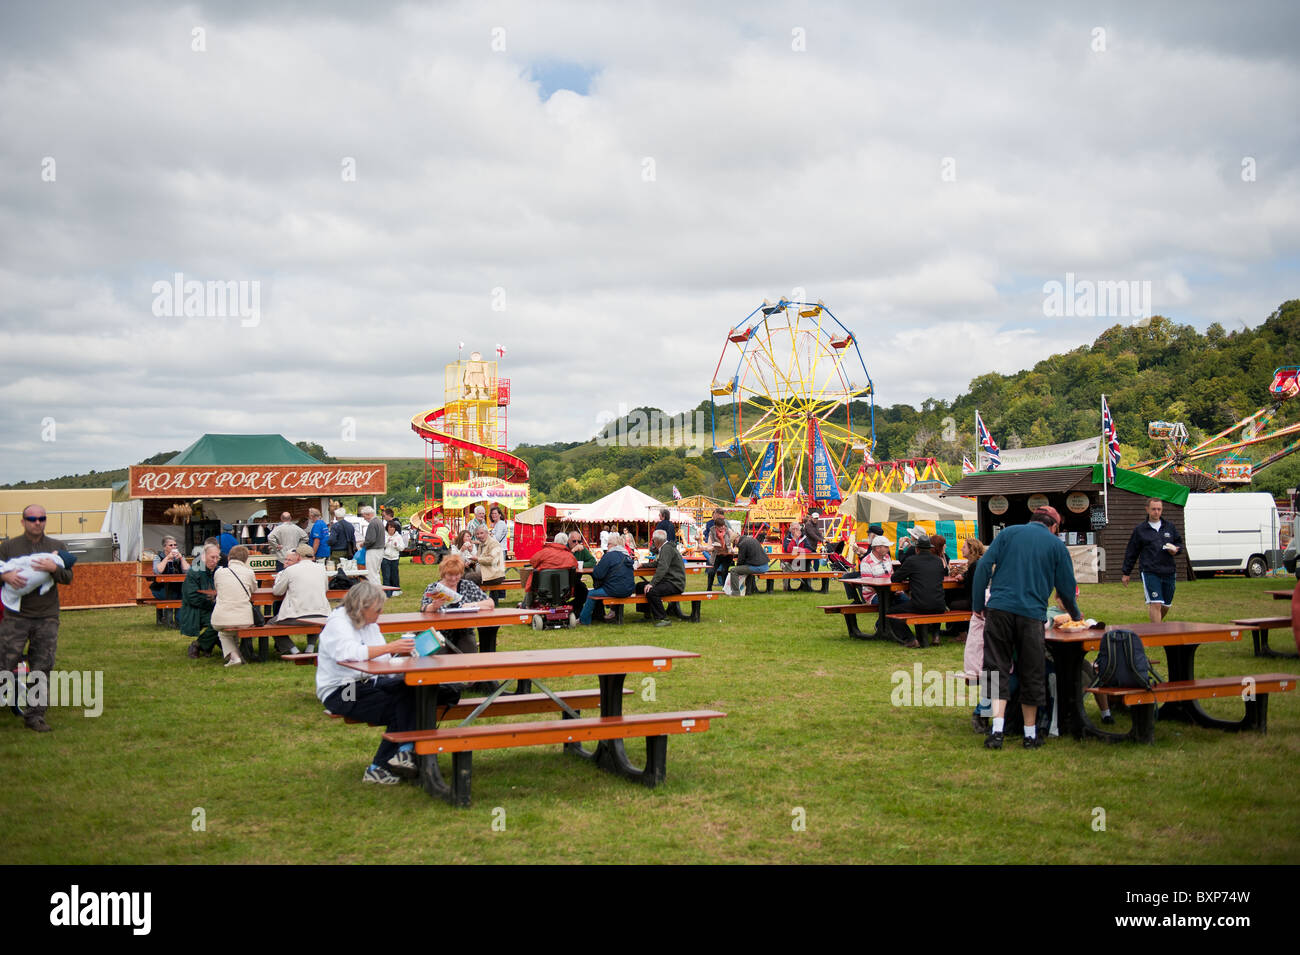 A fairground at a country show Stock Photo